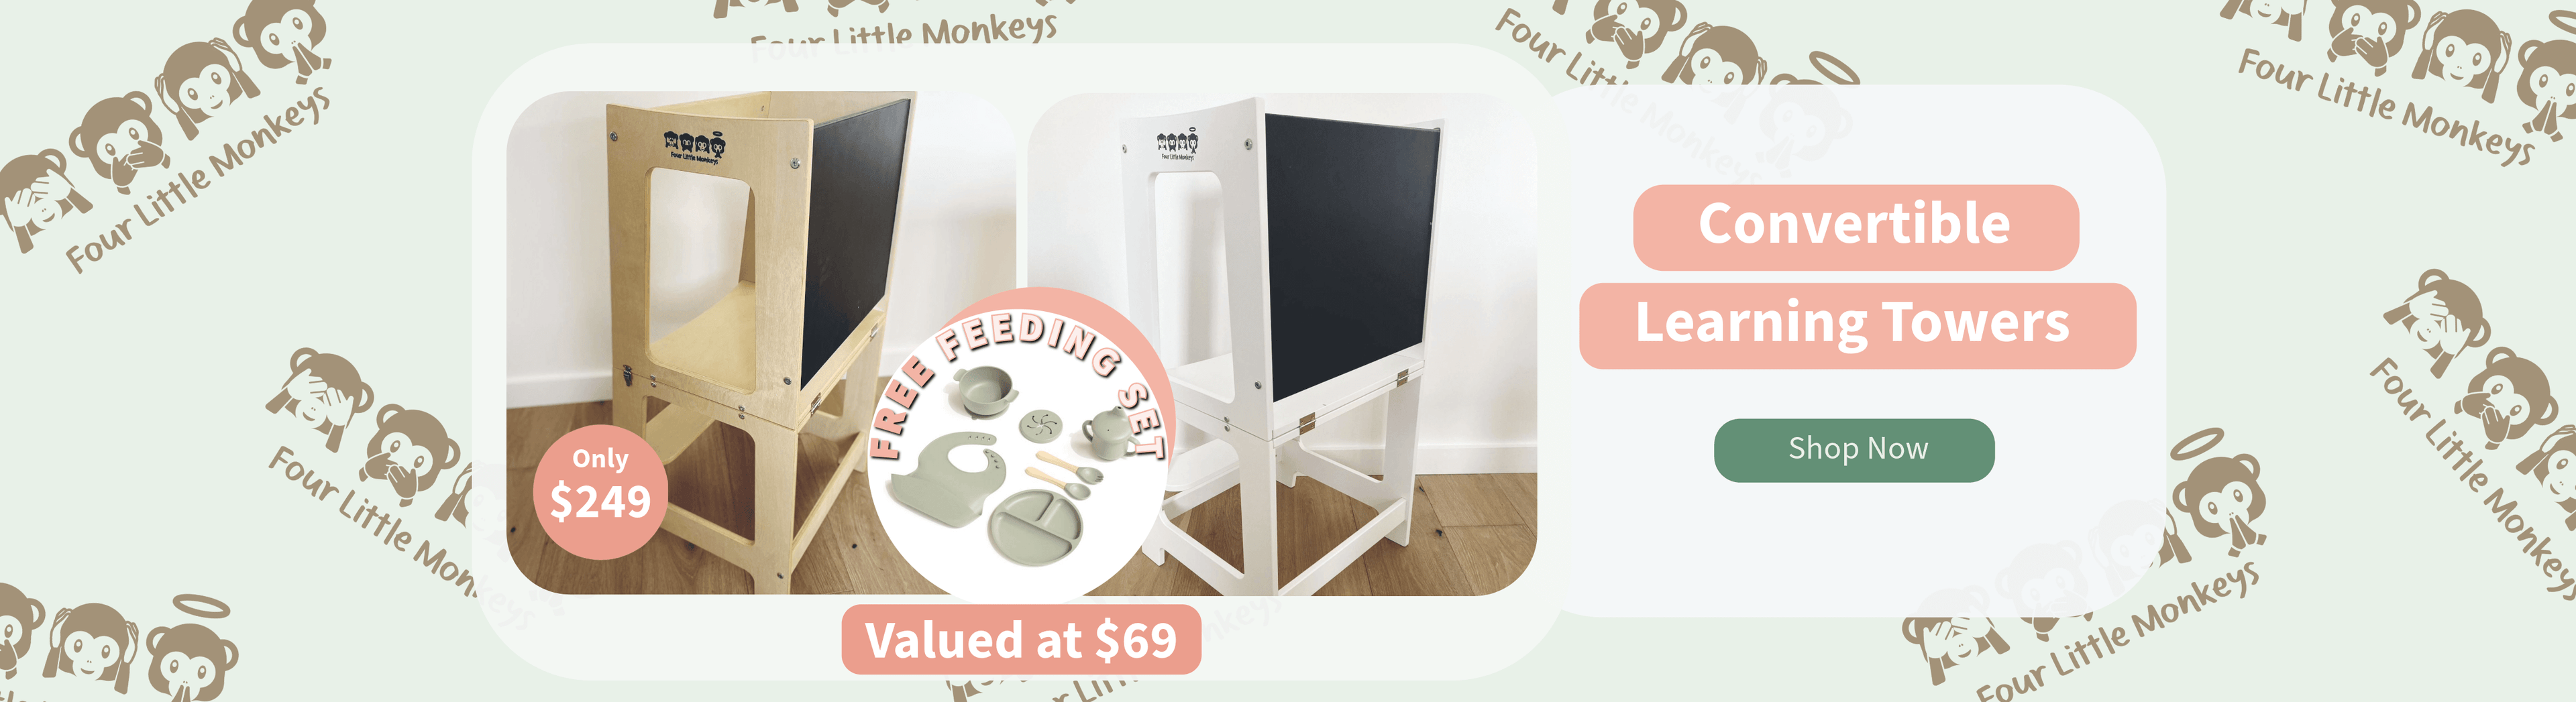 Free Feeding Set valued at $69 with Convertible Learning Tower for only $249